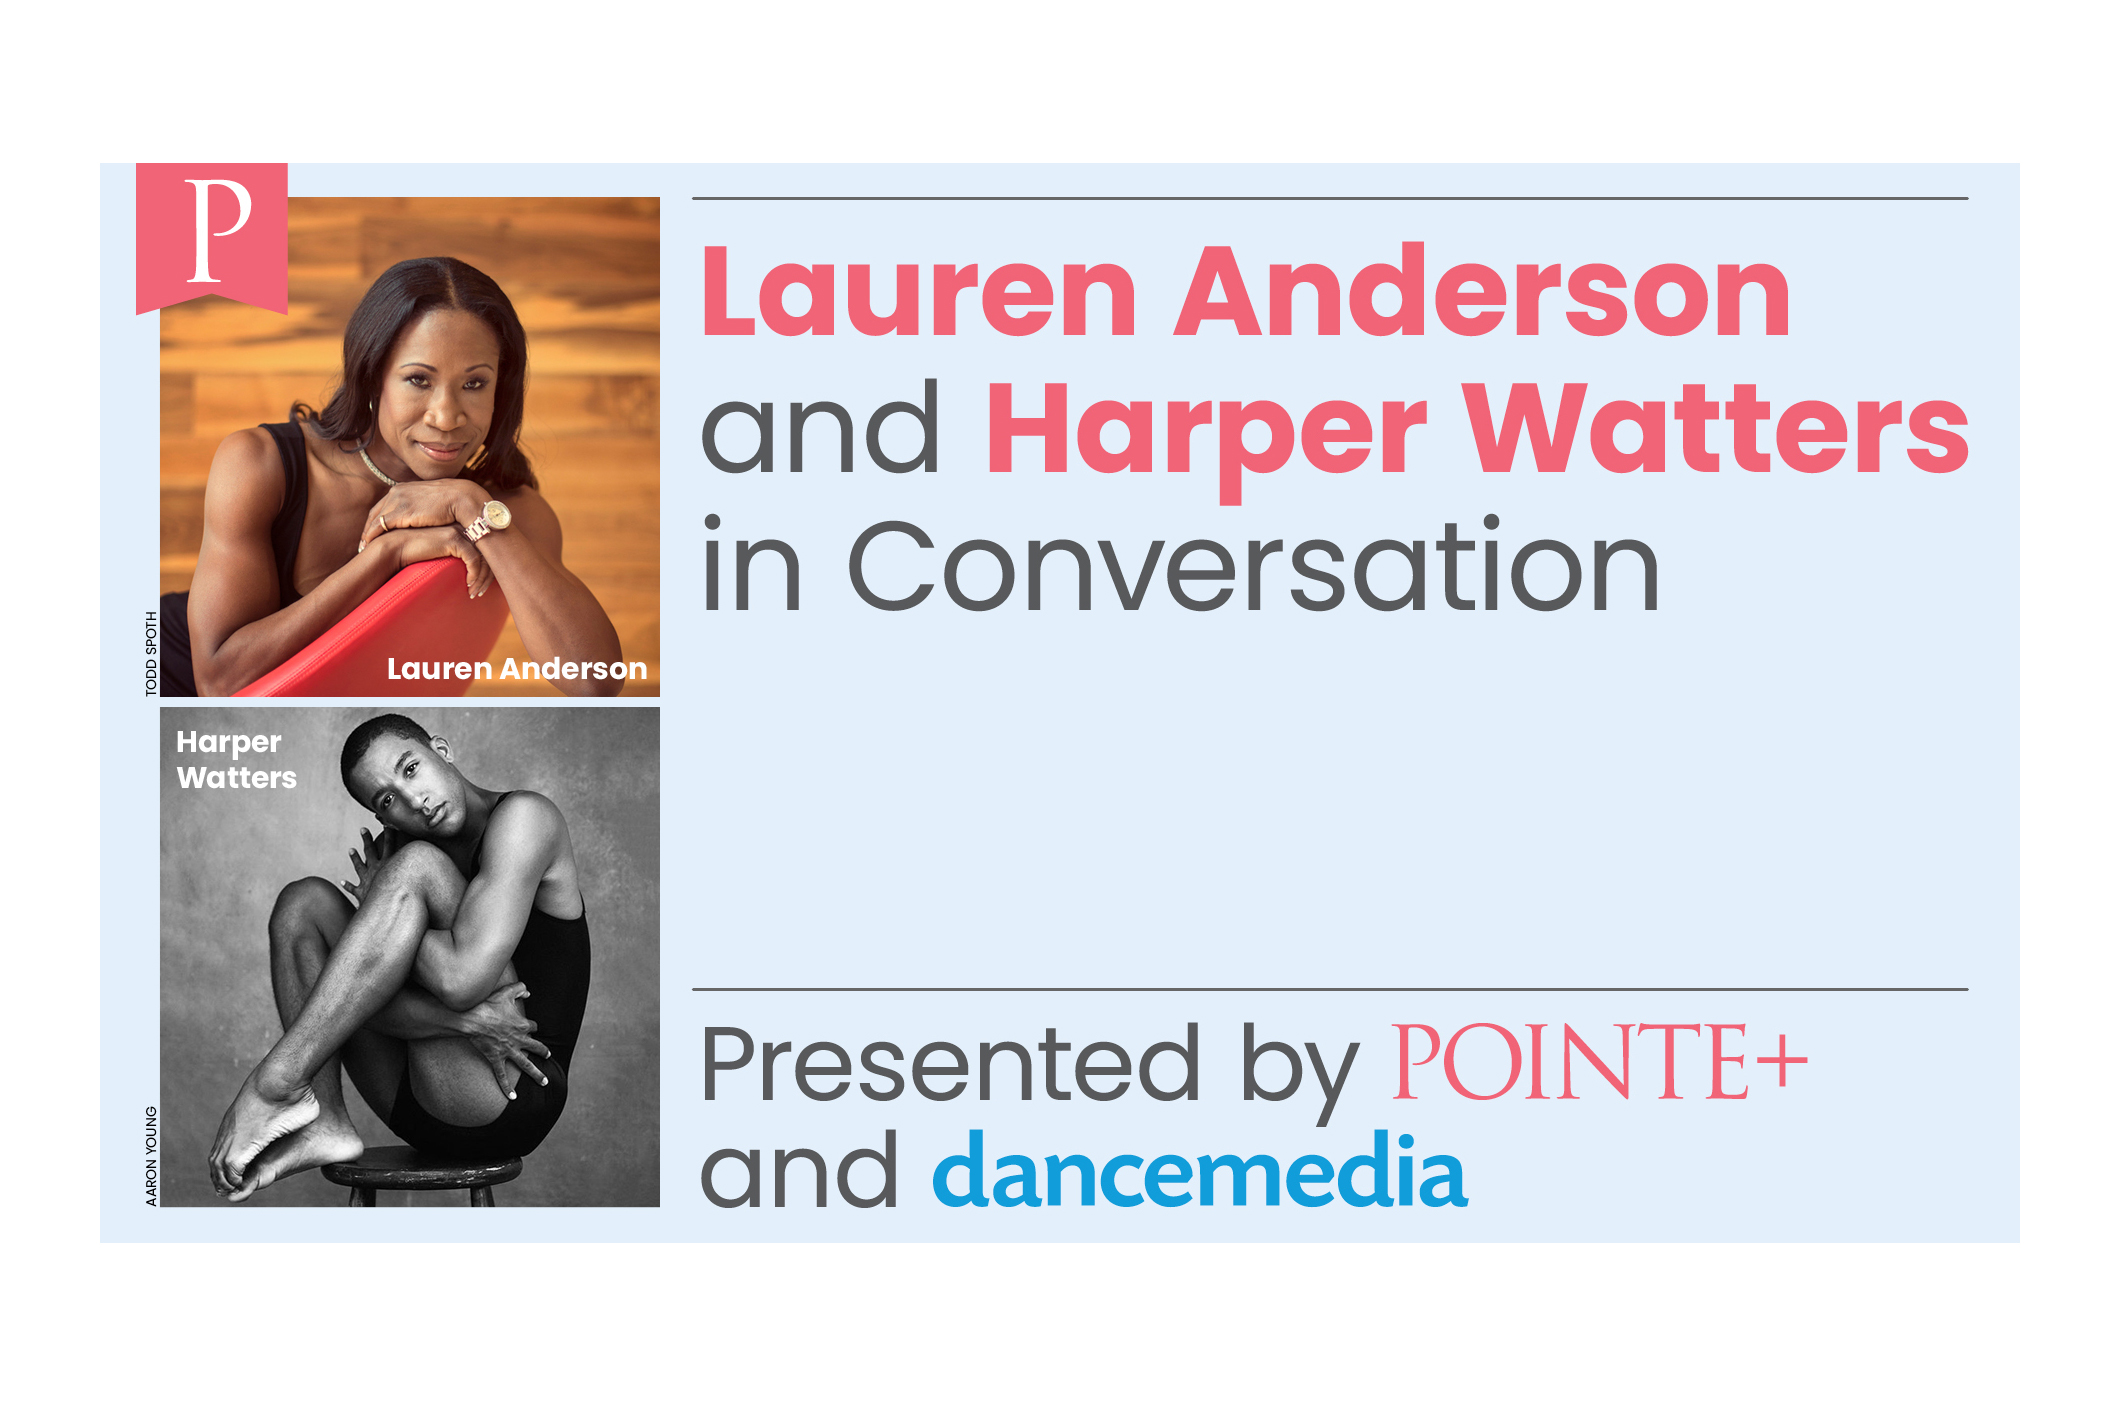 A graphic shows two square-shaped photos, one of Lauren Anderson and the other, right below of Harper Watters. To their left are the words "Lauren Anderson and Harper Watters in Conversation" on top of a blue background. At the bottom, it says "Presented by Pointe+ and dancemedia."